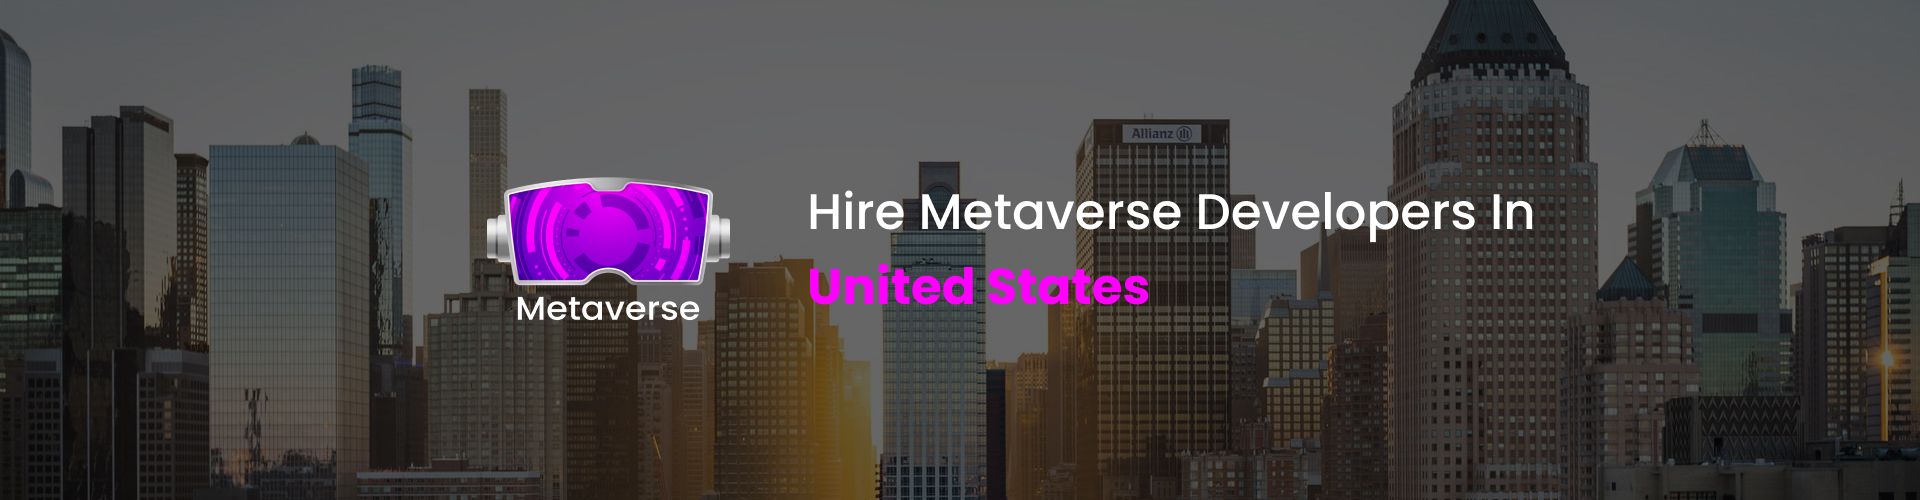 hire metaverse developers in united states